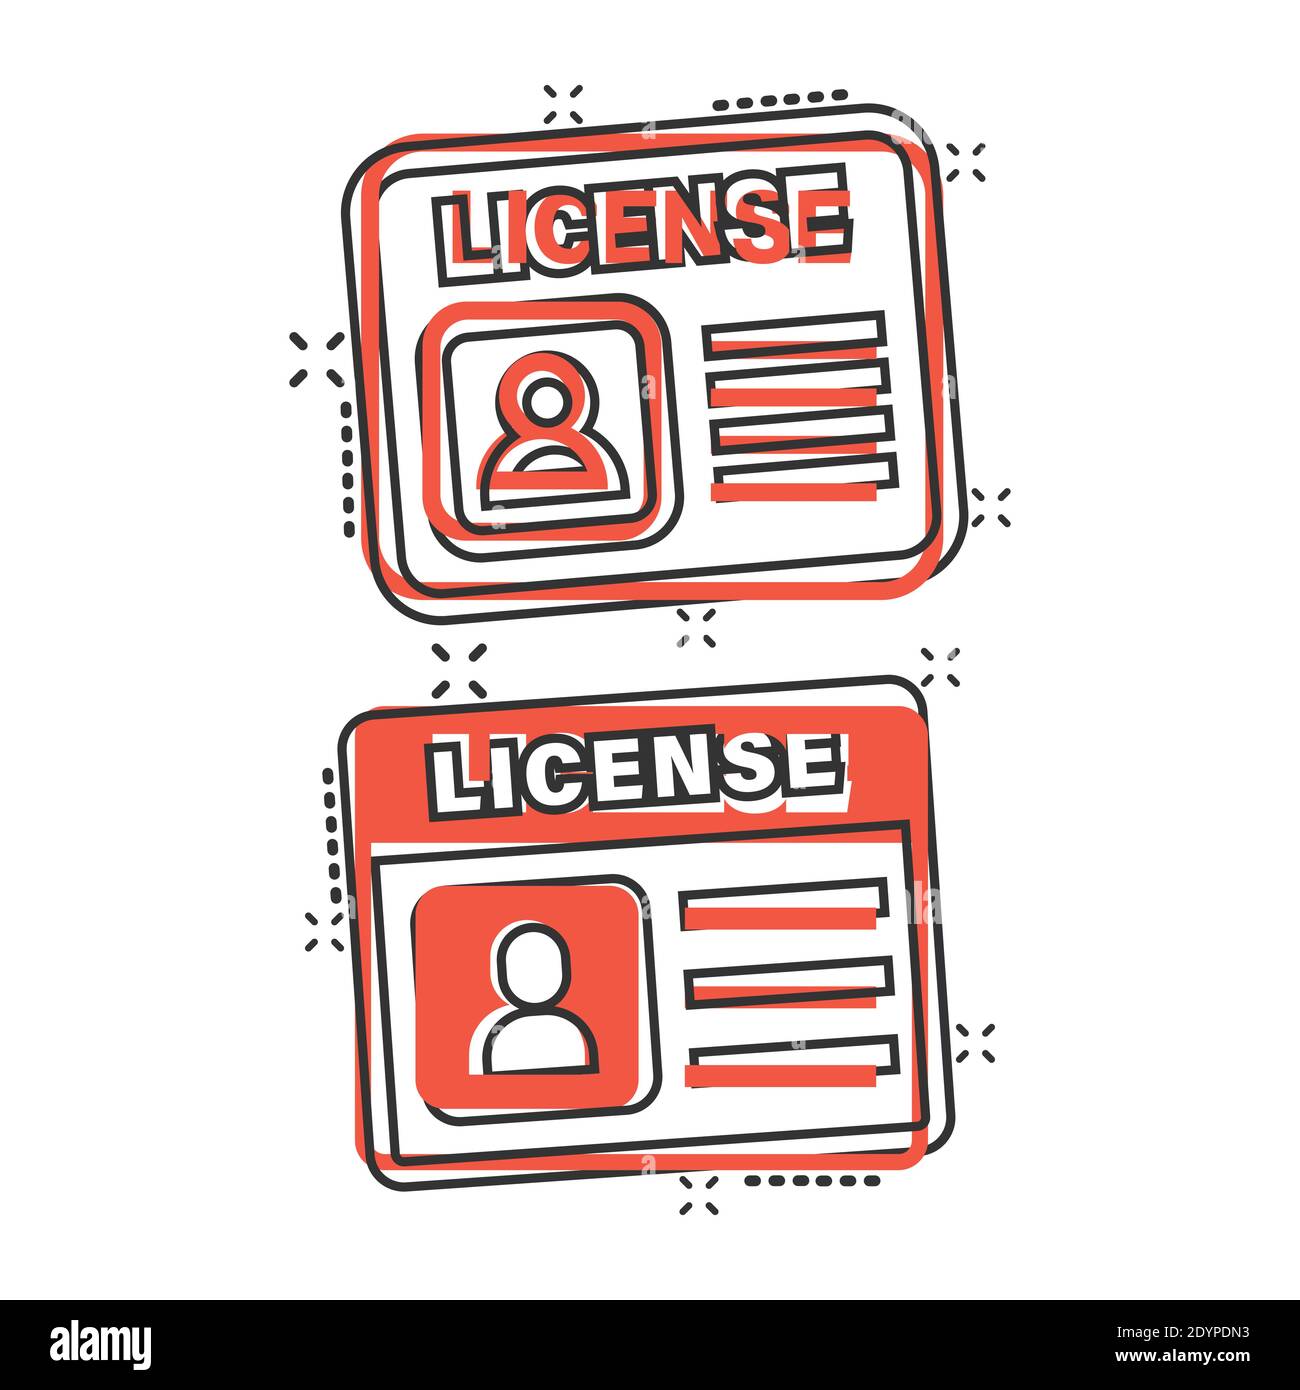 Driver license icon in comic style. Id card cartoon vector illustration on white isolated background. Identity splash effect business concept. Stock Vector